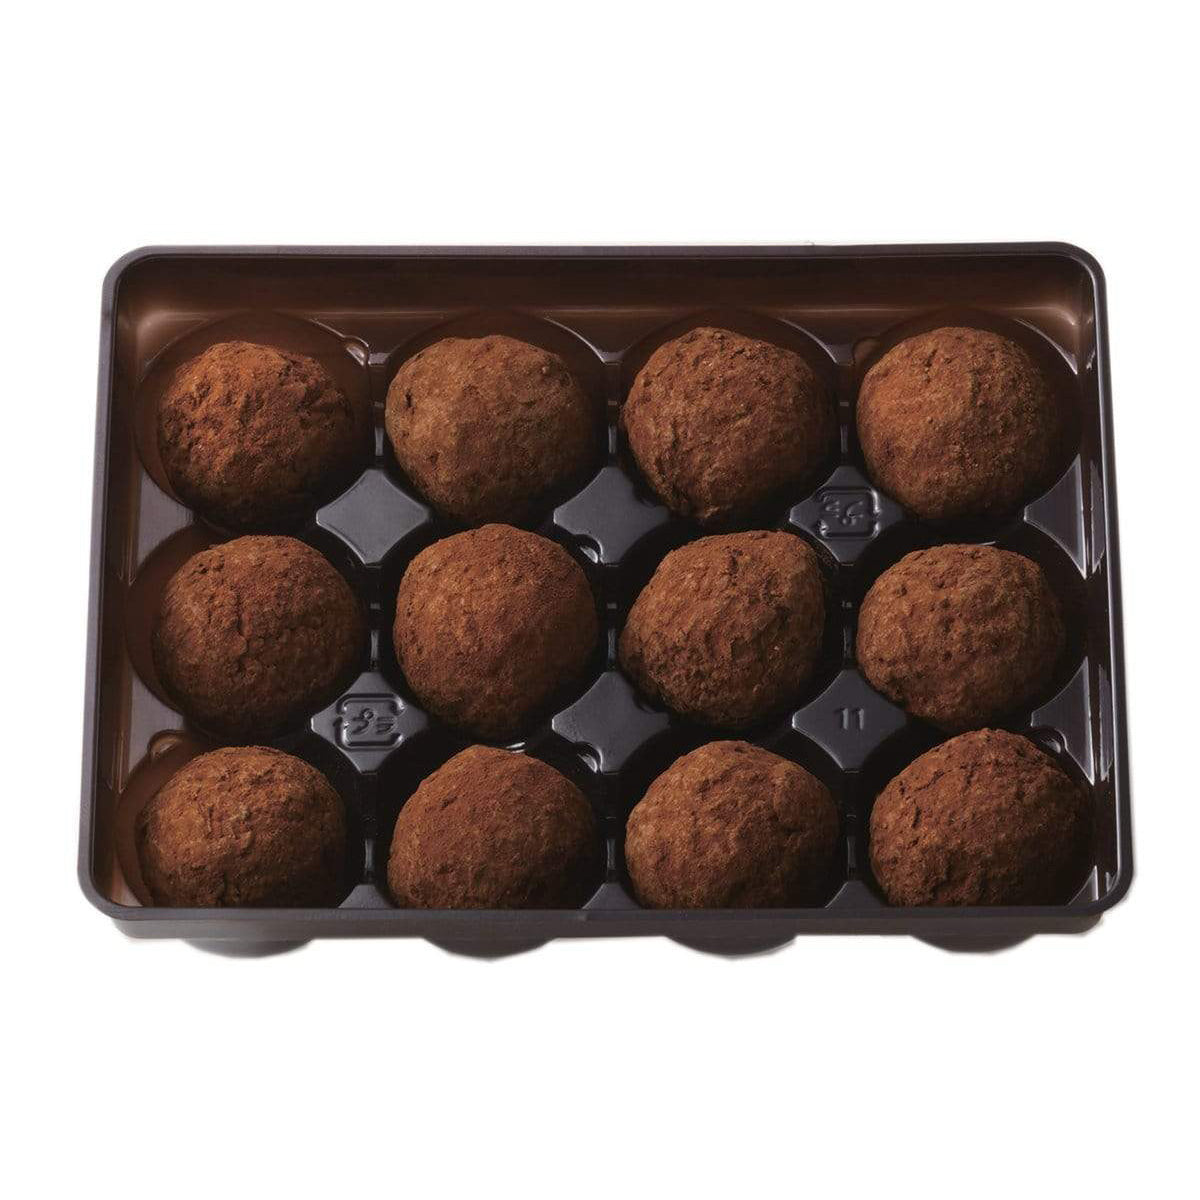 ROYCE' Chocolate - Petite Truffe "Orange" - Image shows a brown tray on a white surface filled with brown chocolate balls.